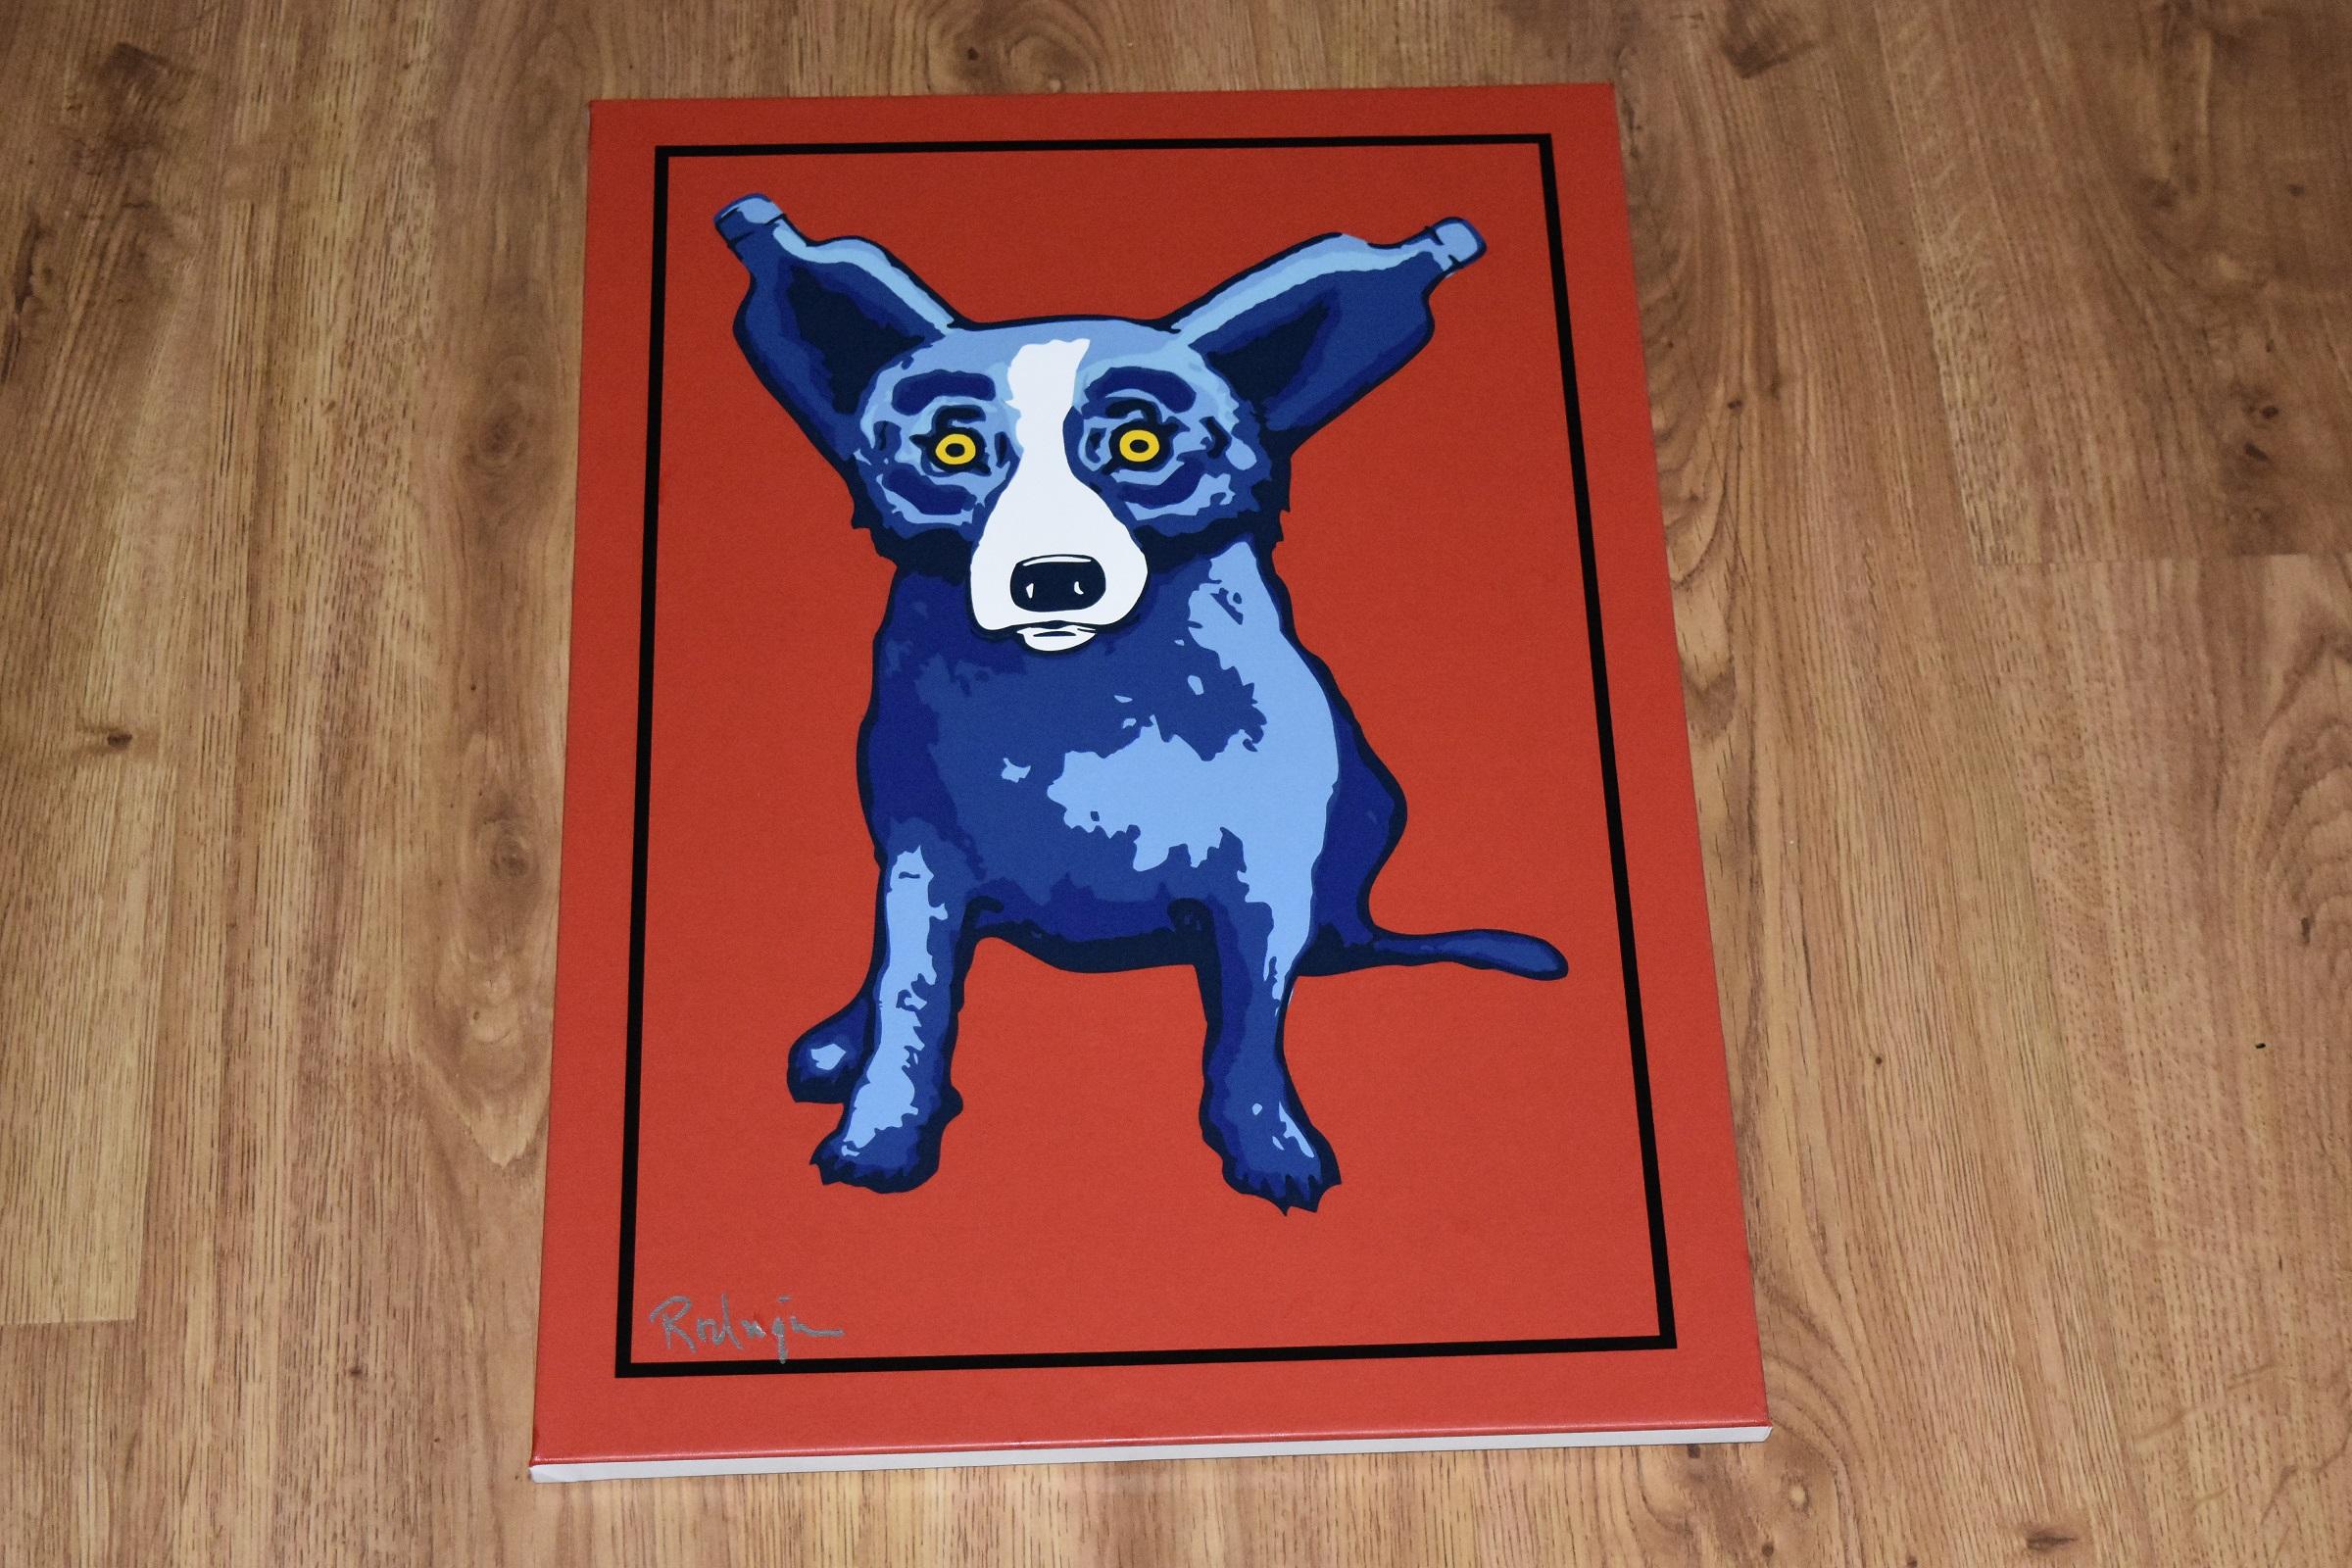 Absolut Dog on Canvas - Signed Silkscreen Blue Dog Print - Red Animal Print by George Rodrigue